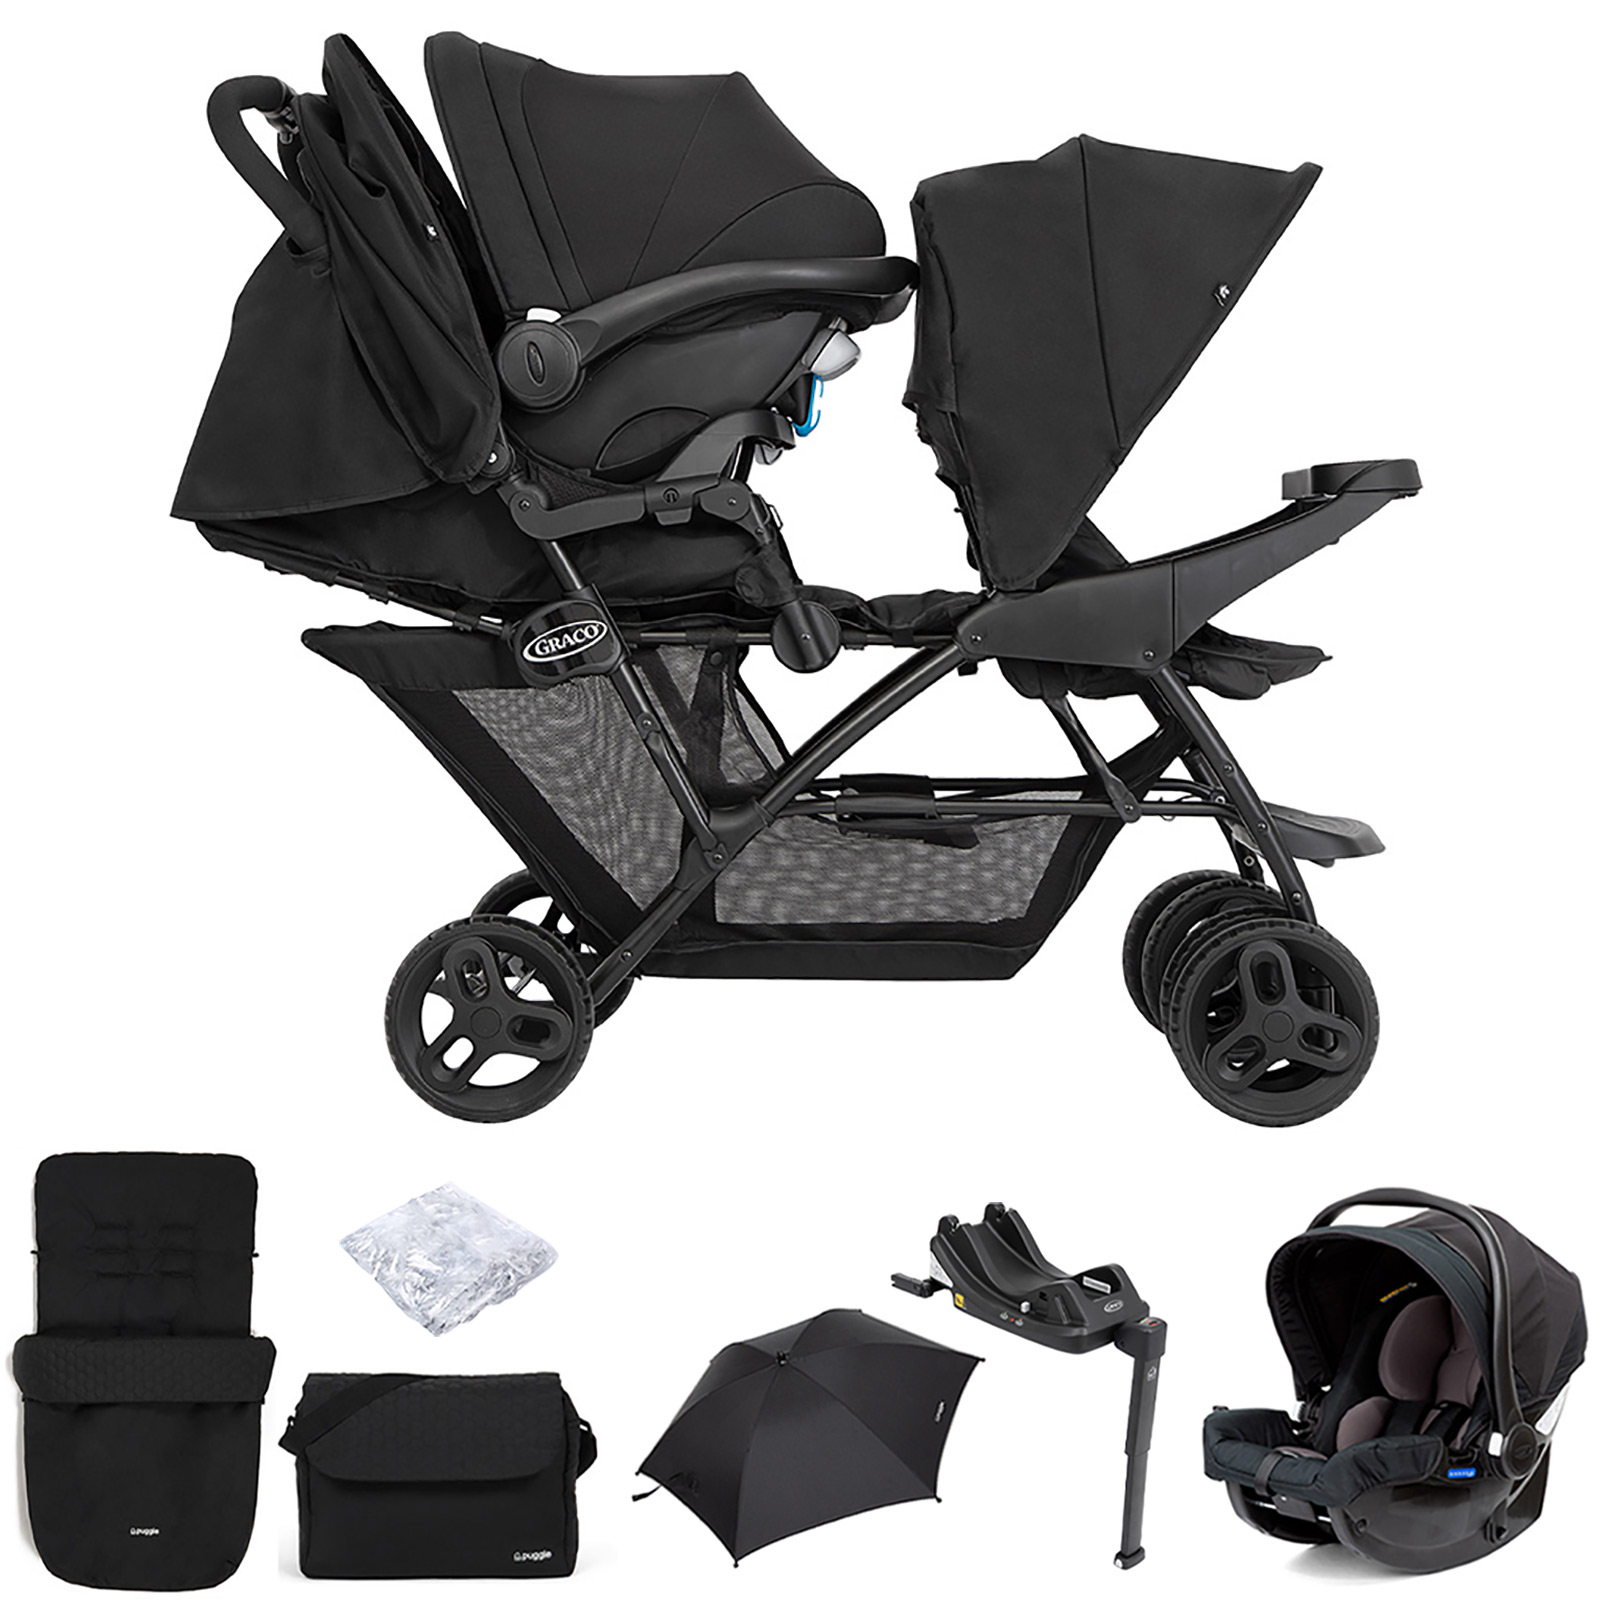 Graco Blaaze™ Stadium Duo Tandem Travel System with Front Apron, Raincover, Footmuff, Changing Bag, Car Seat, Base & Parasol - Night Sky